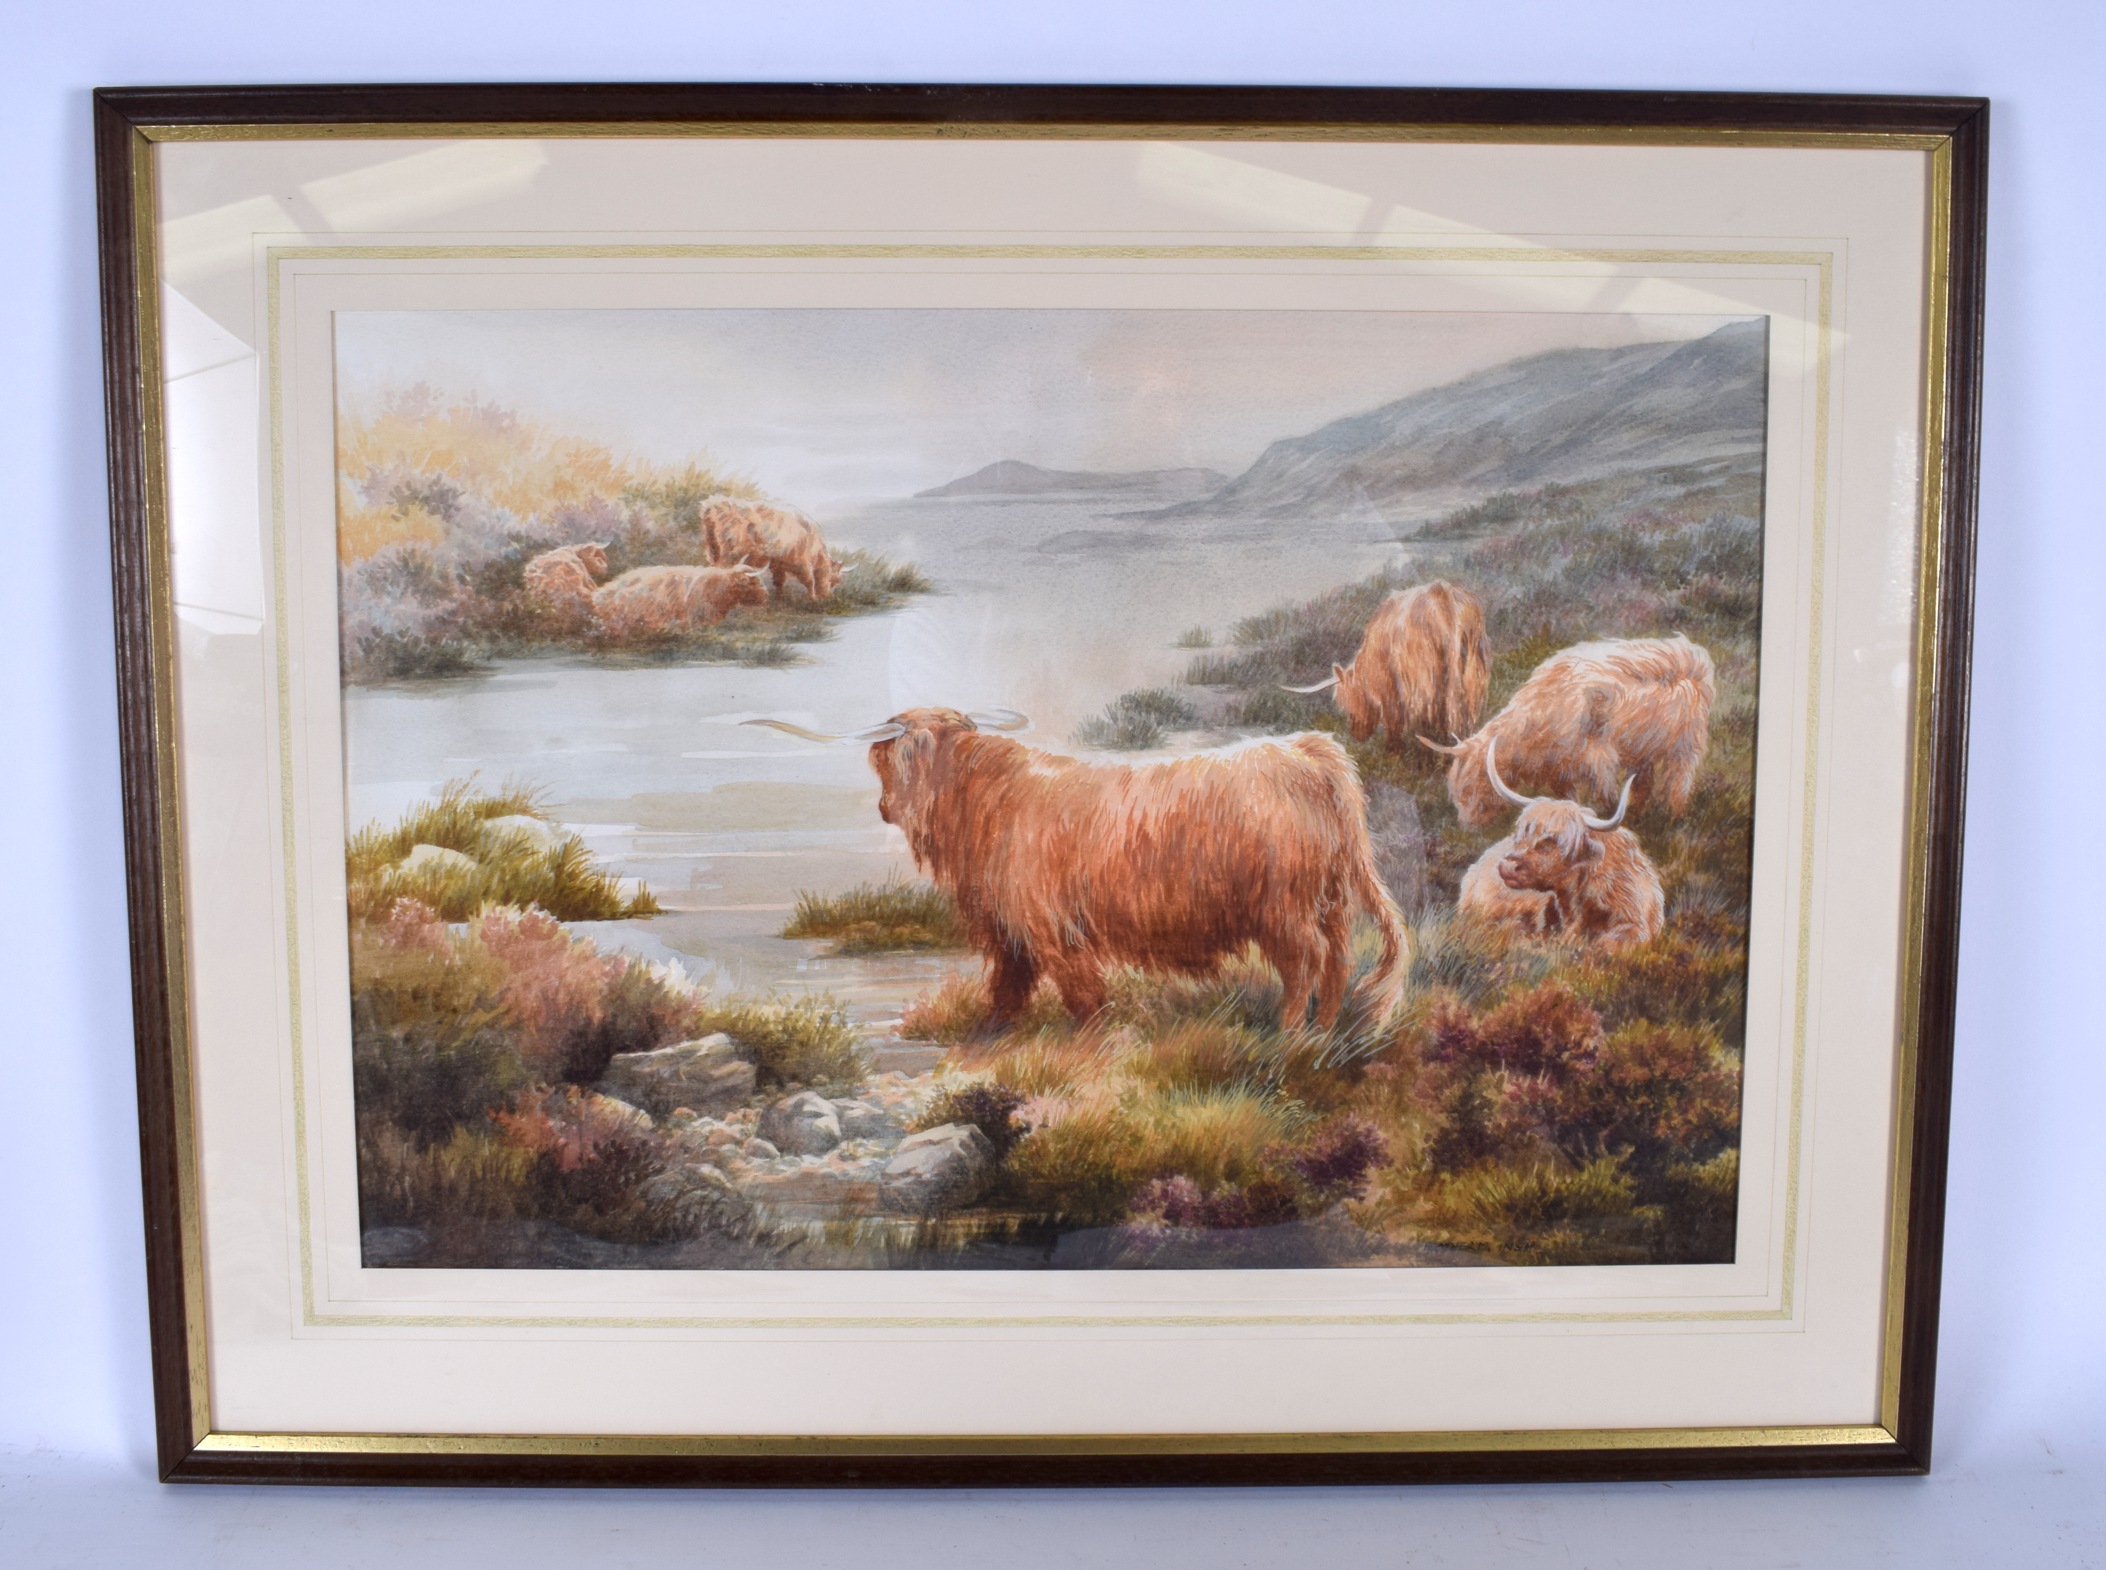 HEATHER M INSH, framed watercolour, cattle in a highland landscape, signed. 35 cm x 52 cm.